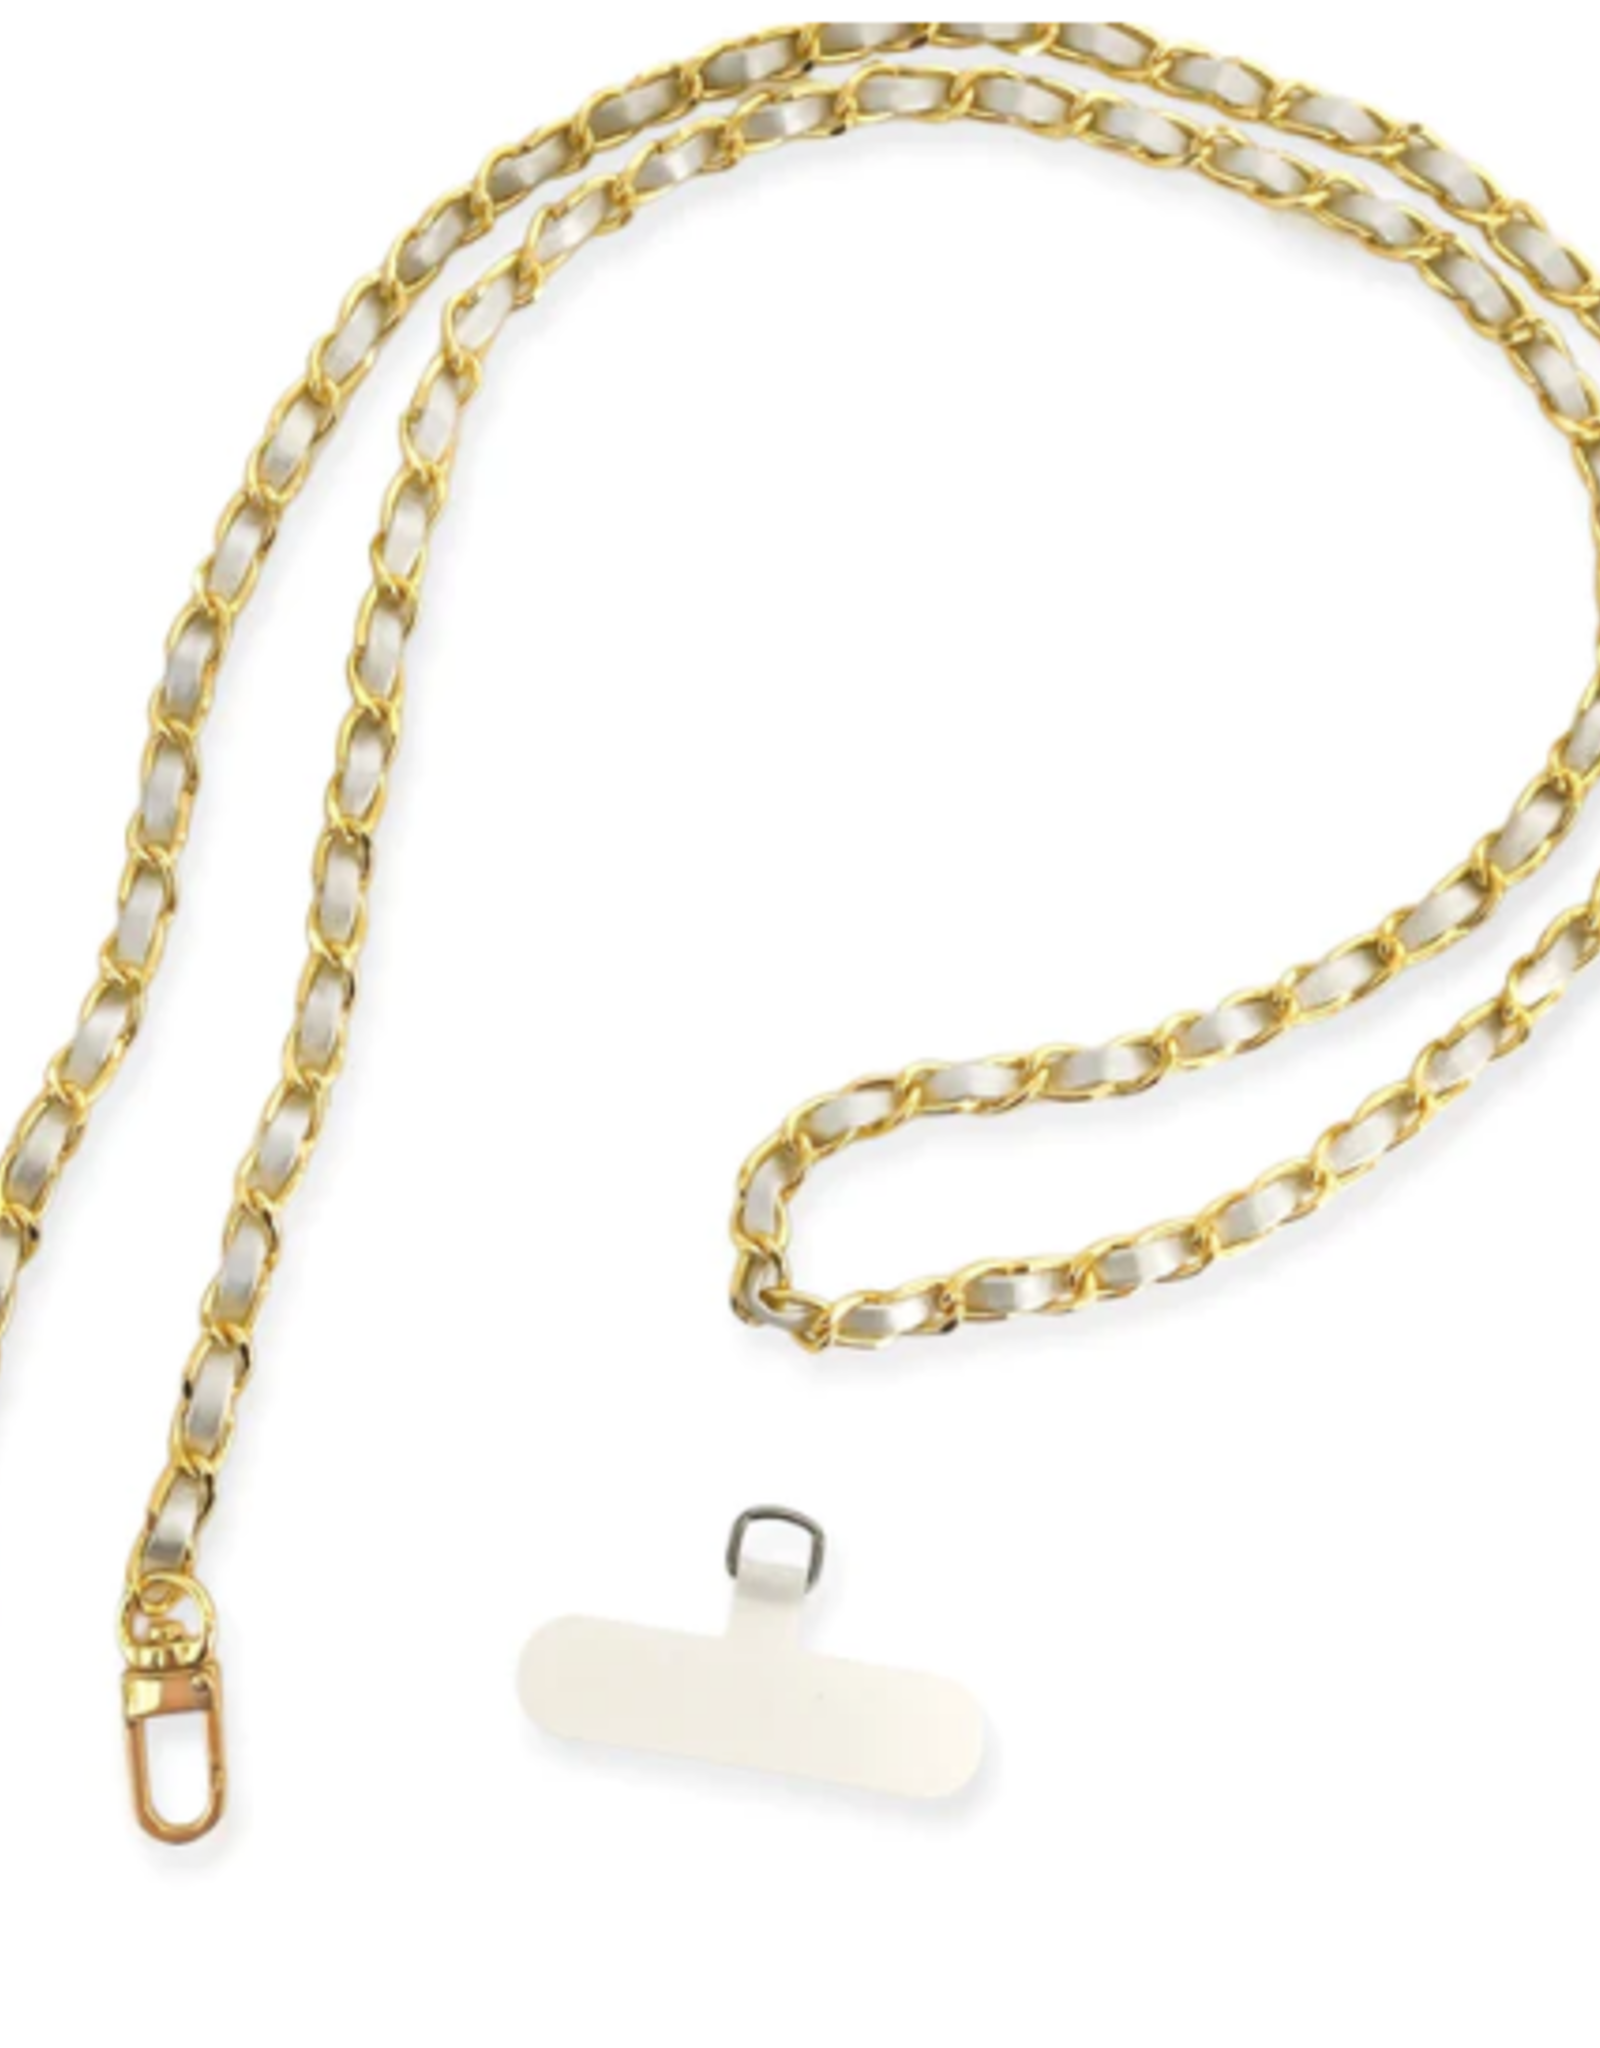 Gold Chain Link Silver Vegan Leather Phone Chain